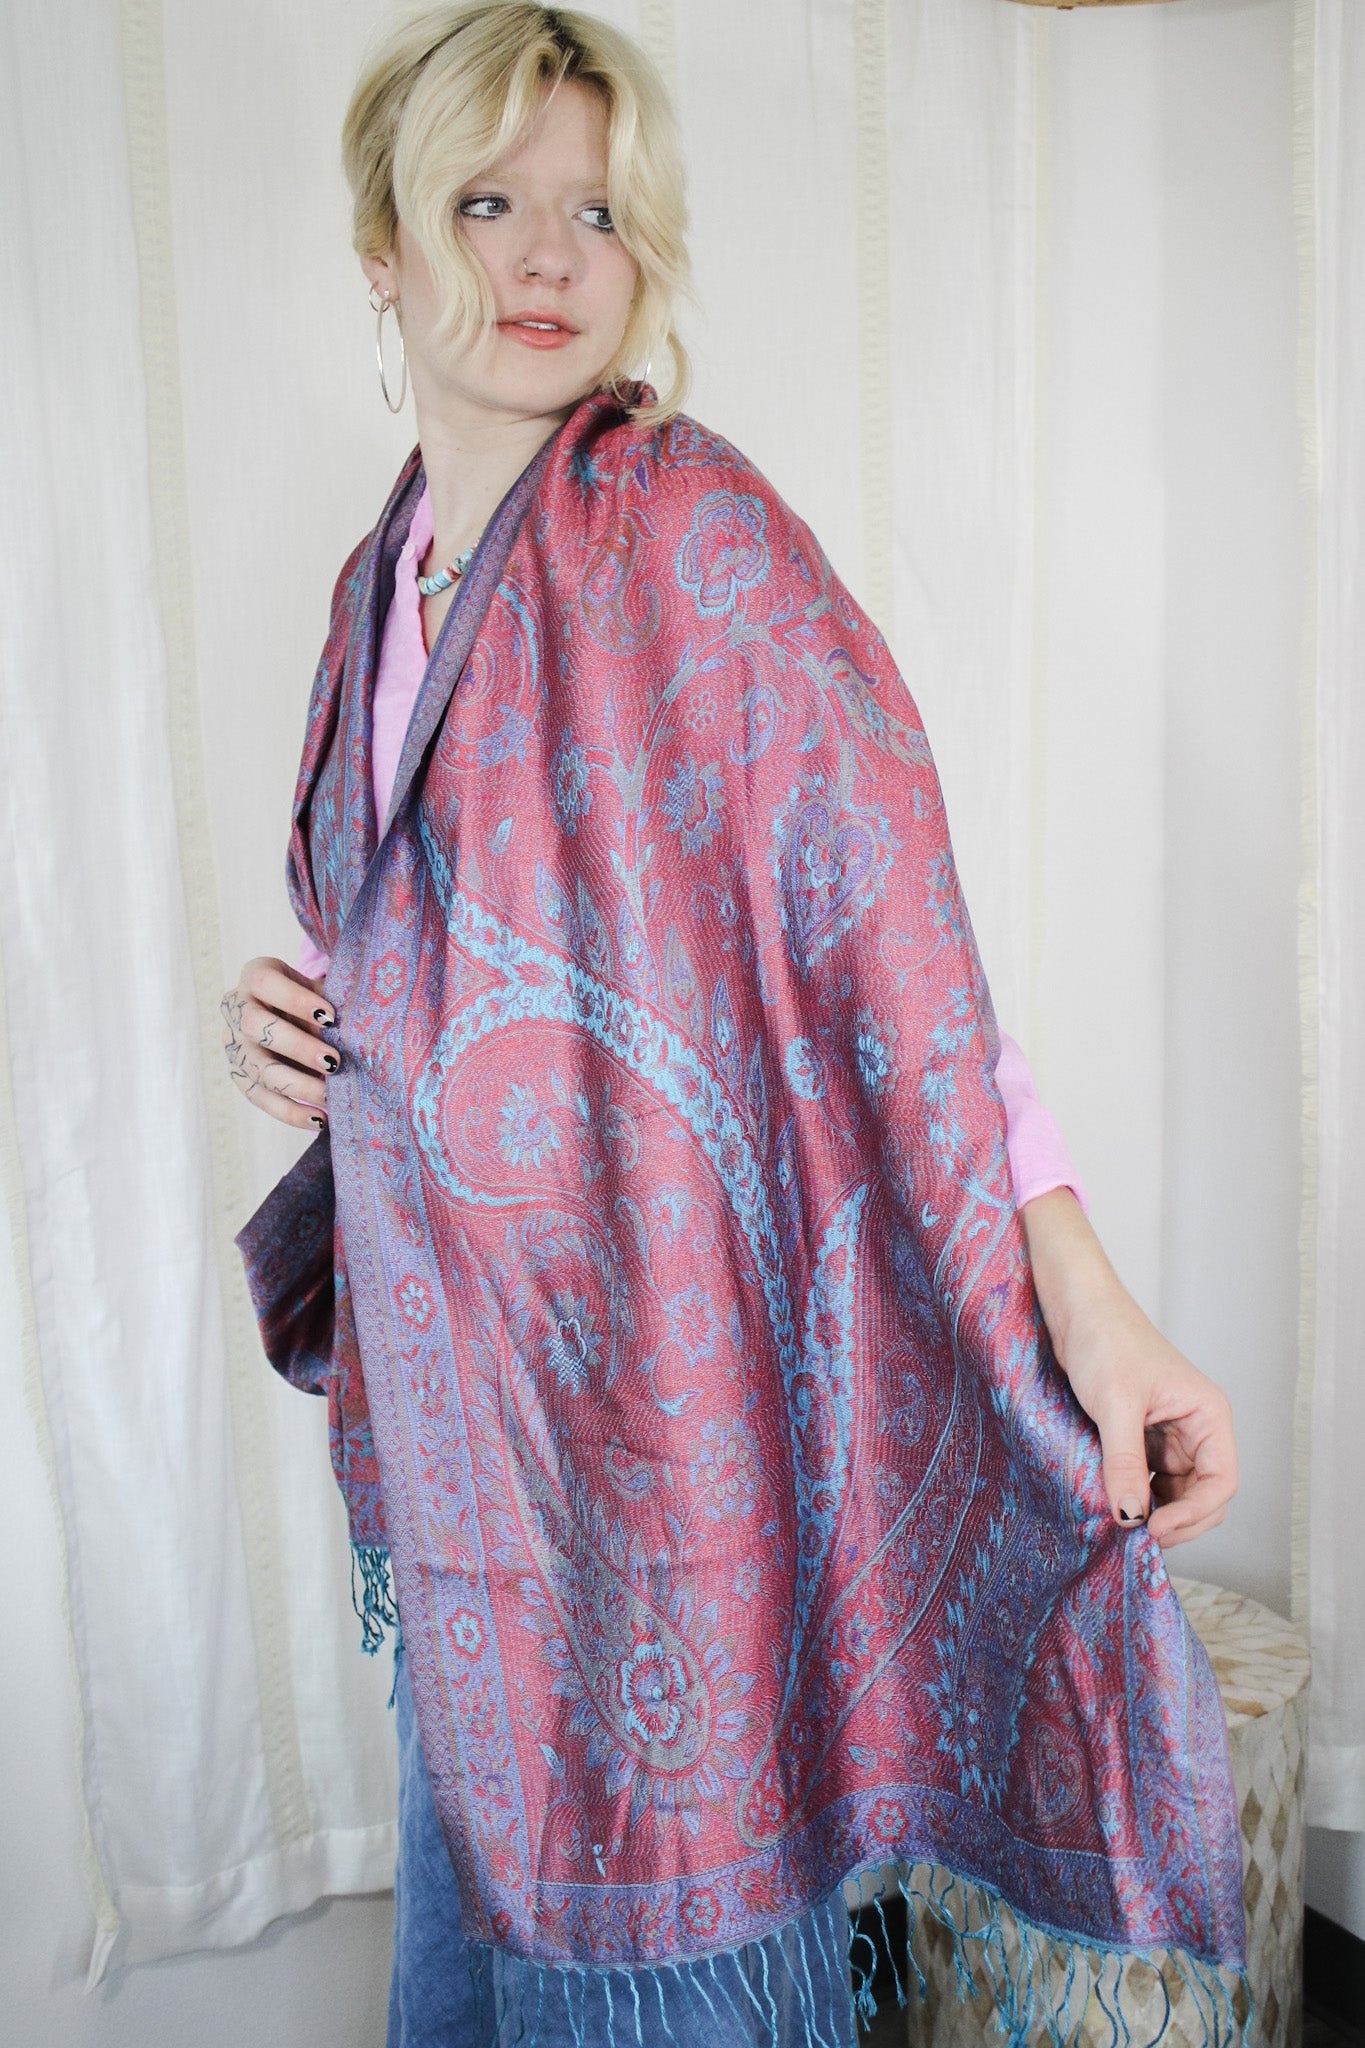 Intricate Pink & Blue Woven Silk ScarfRare FindsScarf